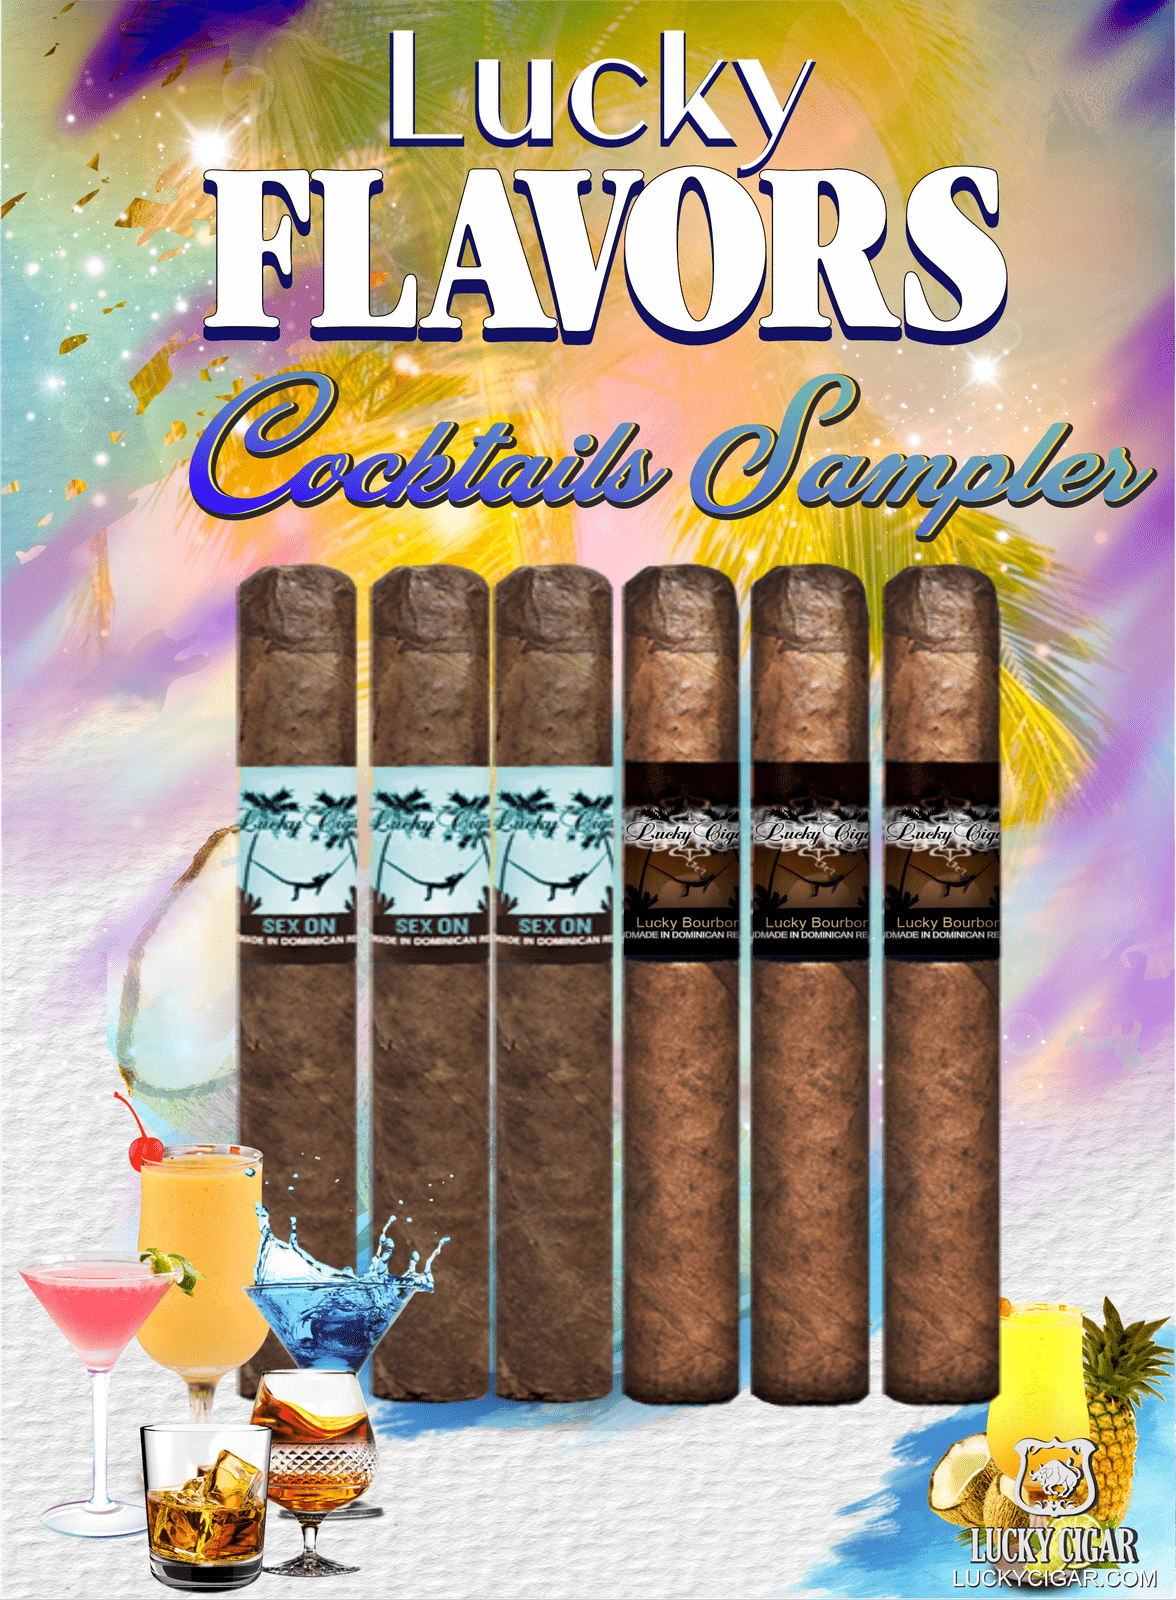 Flavored Cigars: Lucky Flavors 6 Piece Cocktails Sampler